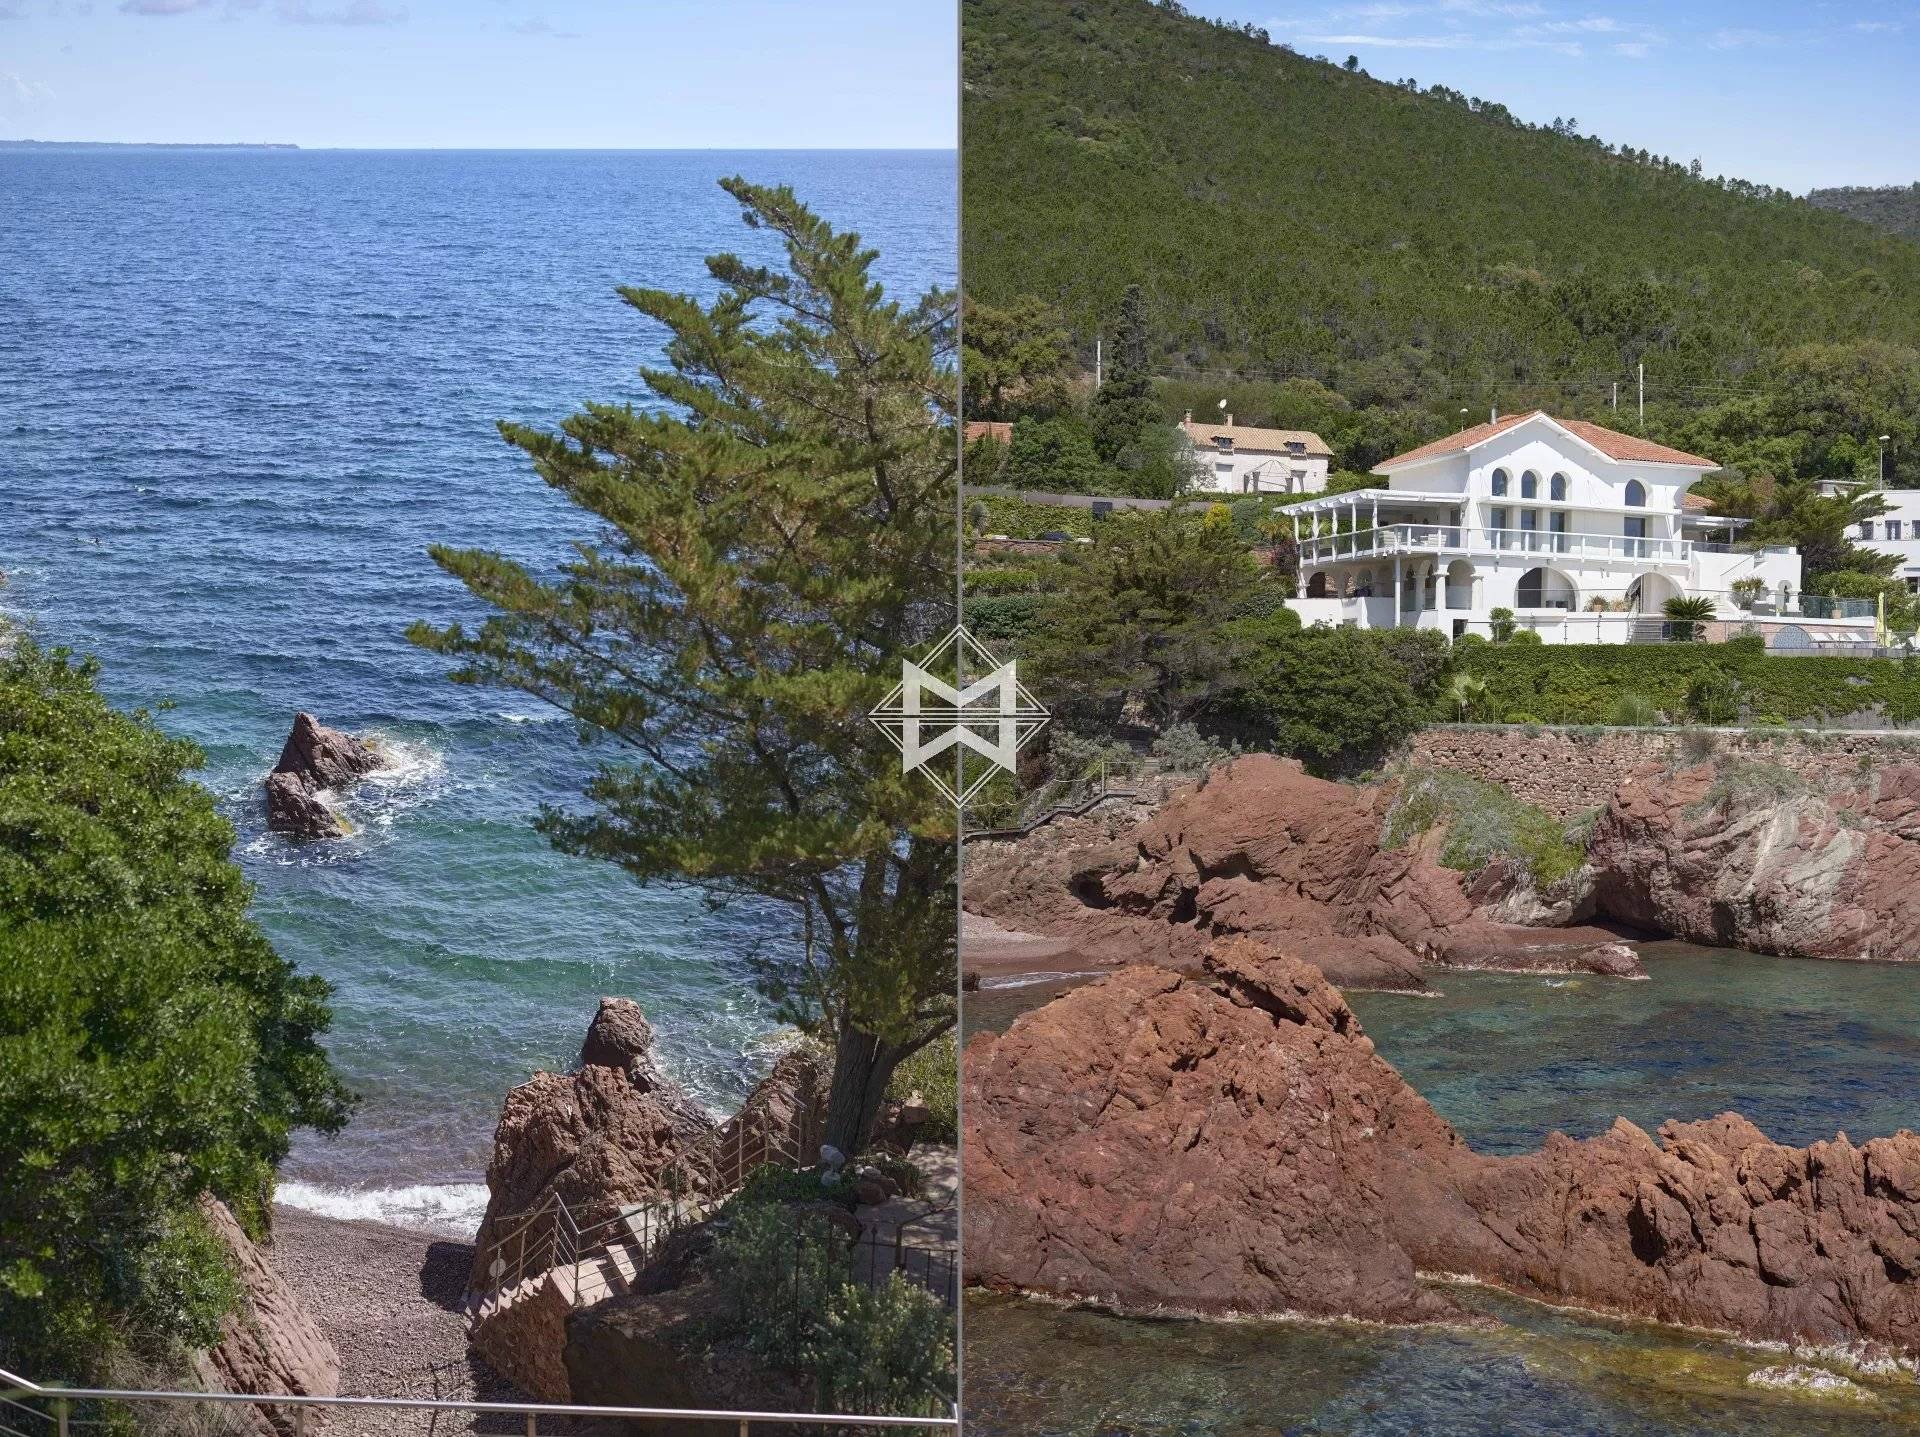 Exceptional location for this waterfront property